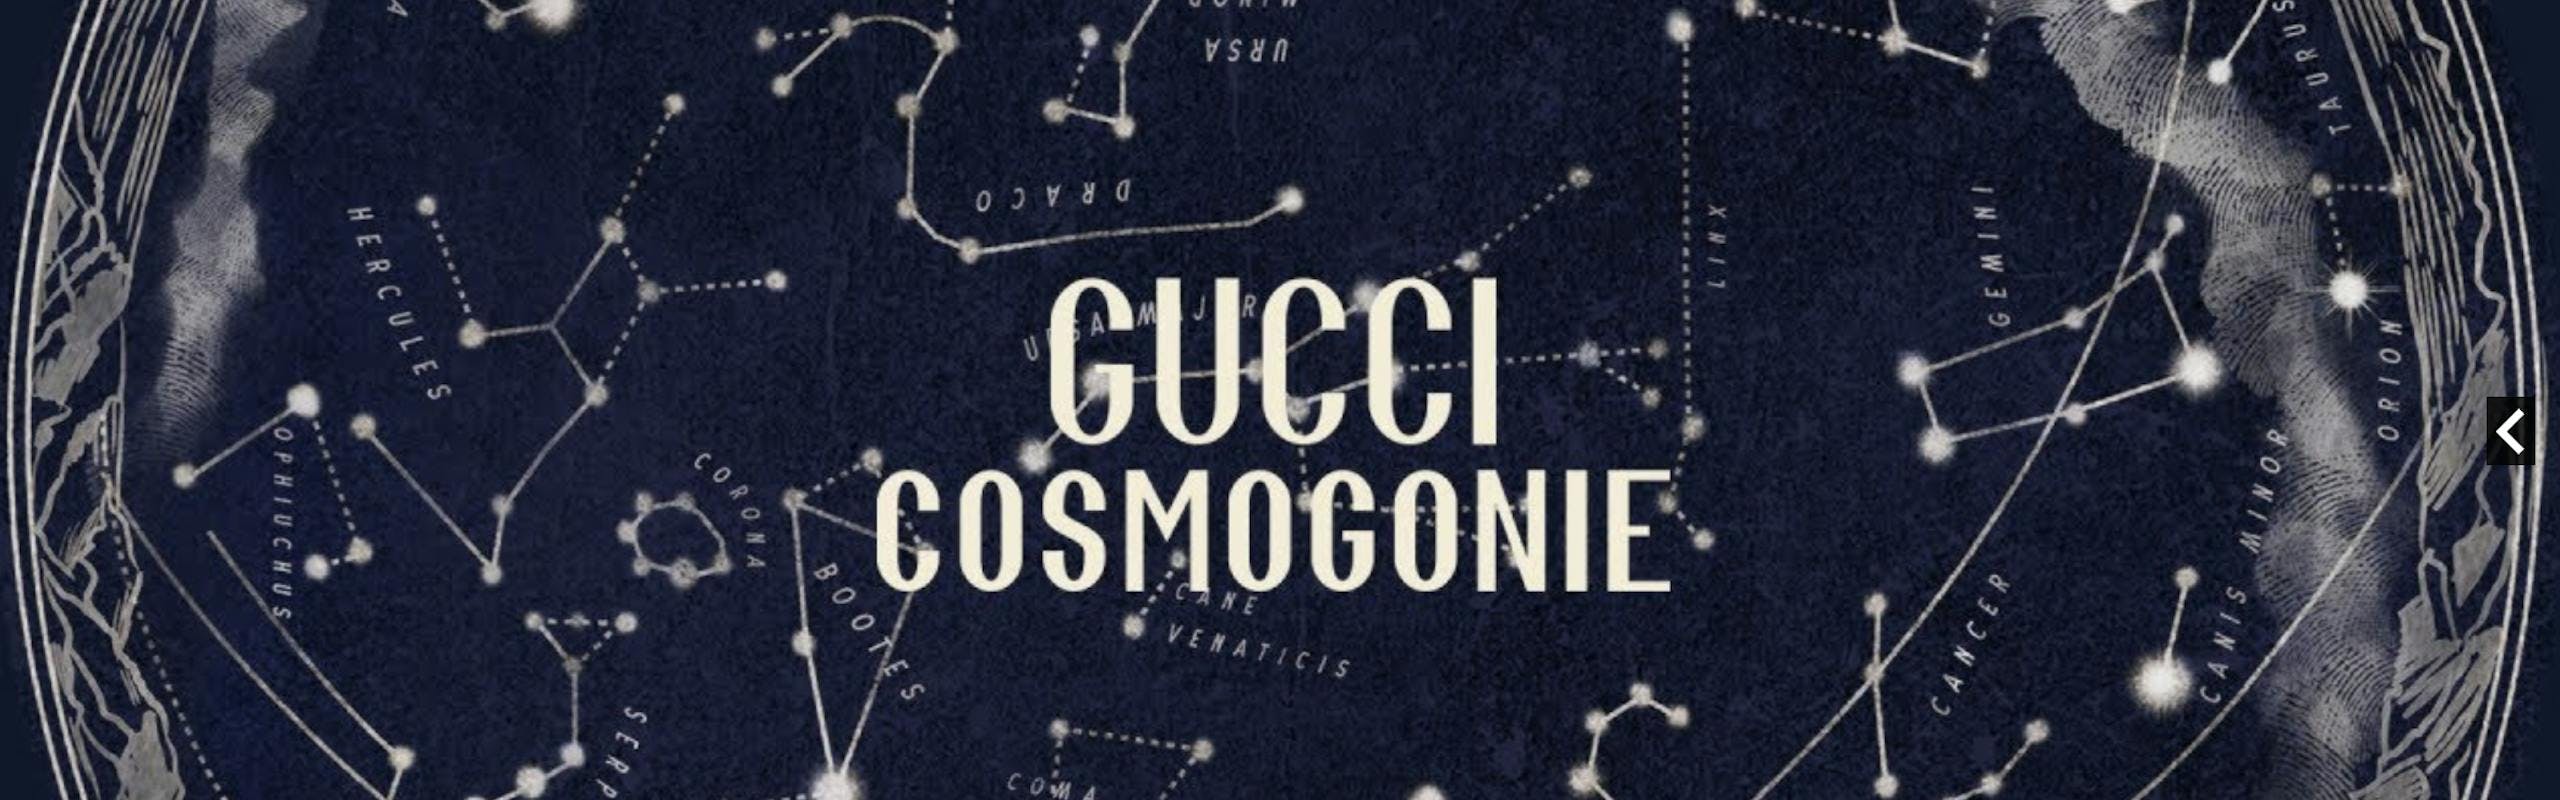 Blue map with constellations with the words "Gucci Cosmogonie"